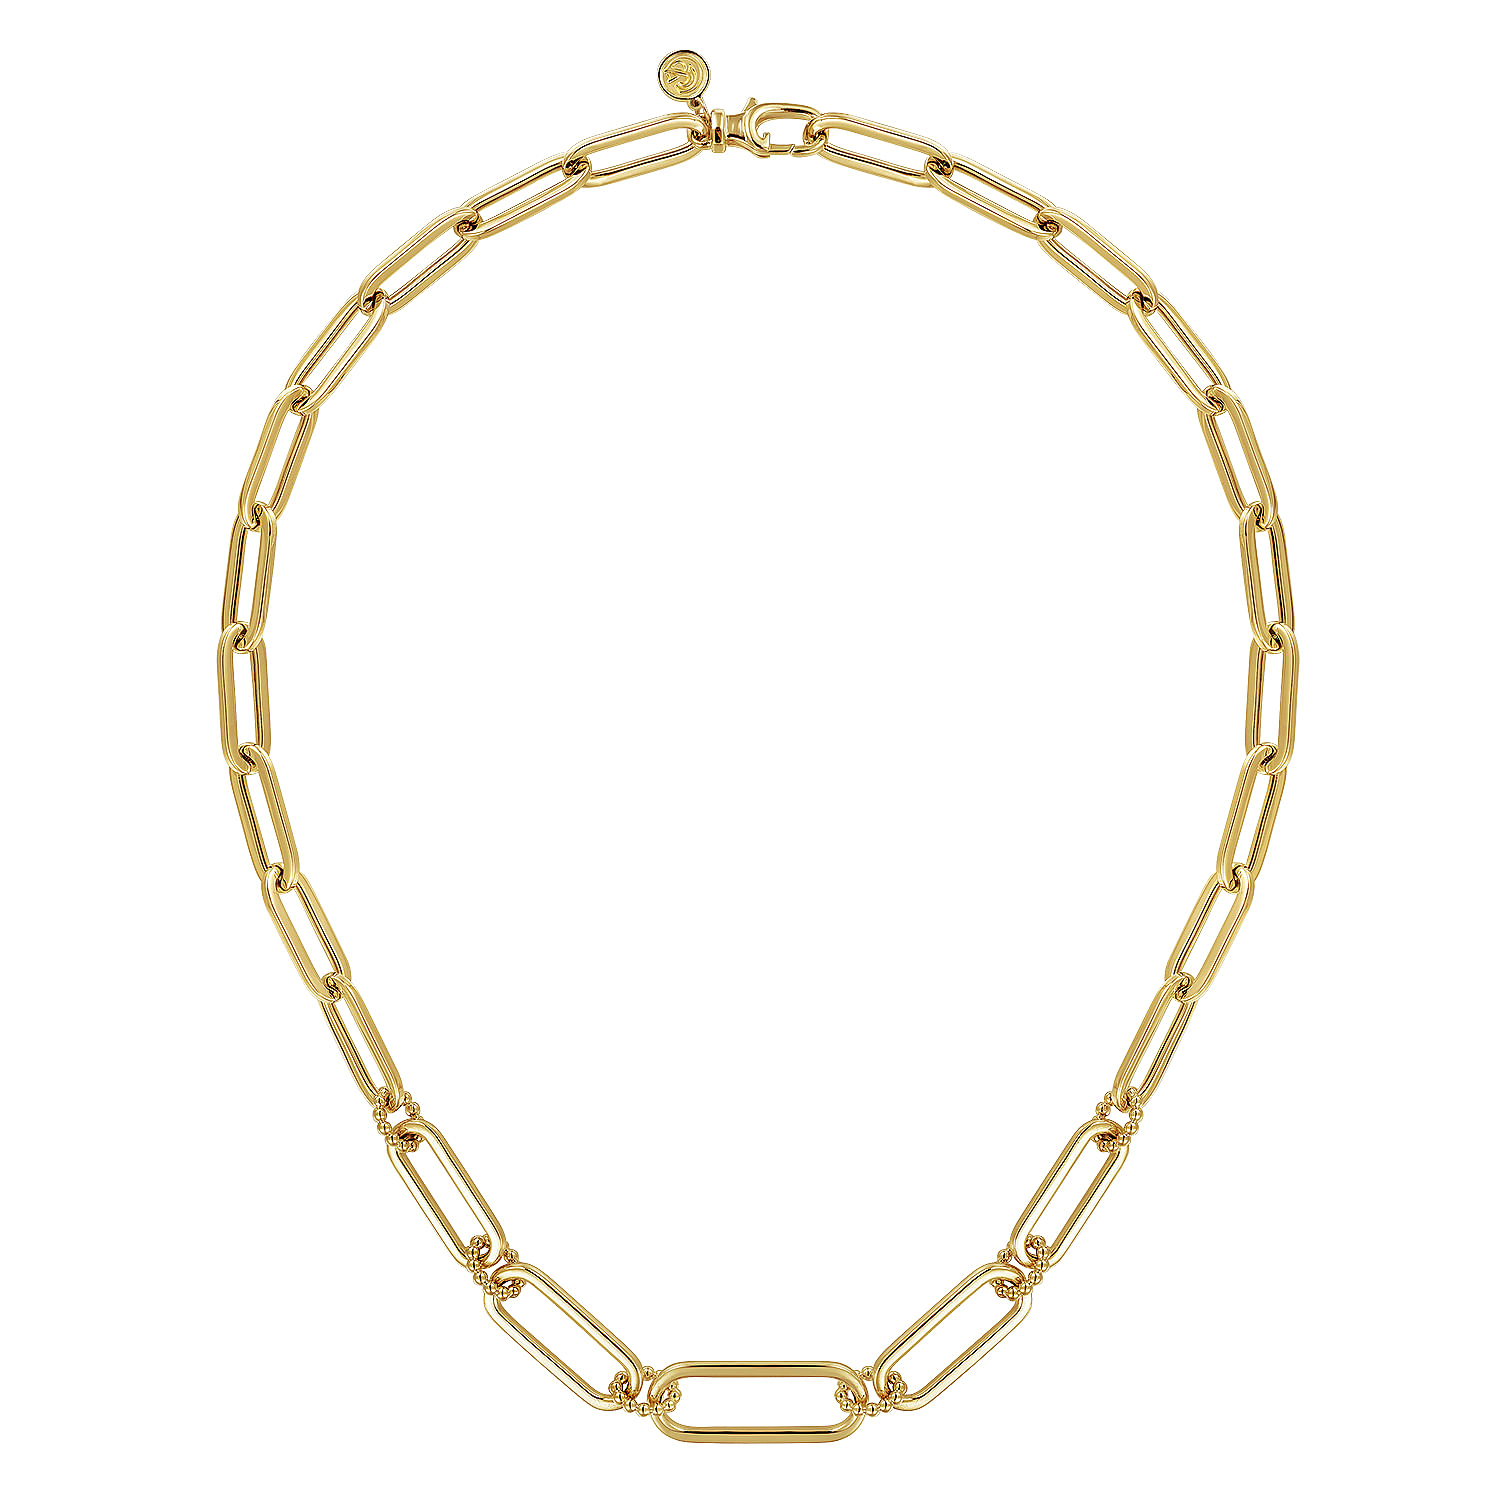 17-inch-14K-Yellow-Casted-Gold-Bujukan-Ball-Link-and-Hollow-Paperclip-Link-Chain-Necklace2